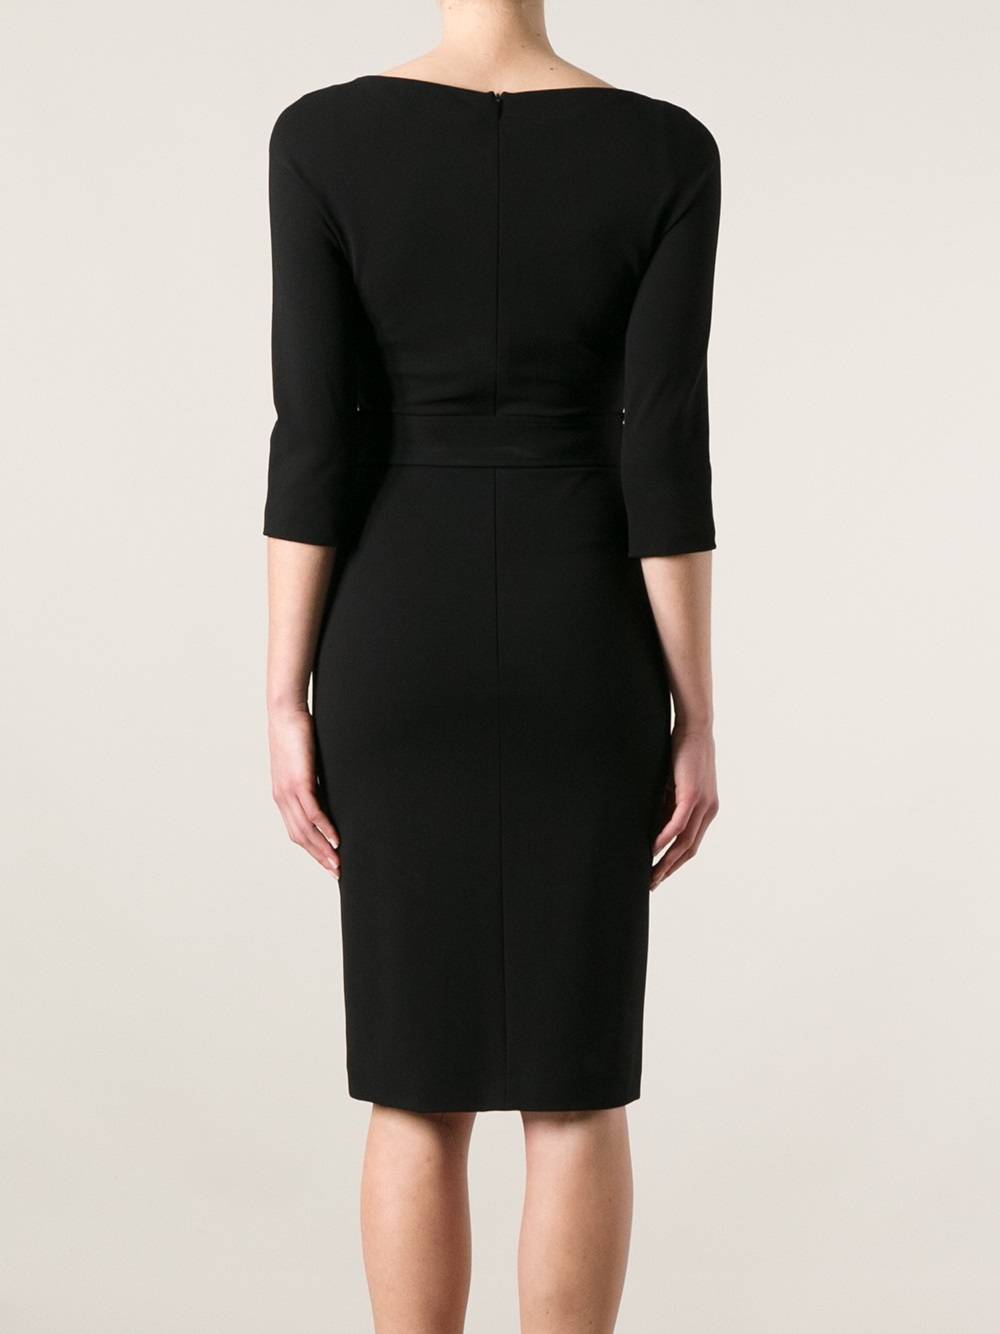 Gucci Fitted Dress in Black - Lyst